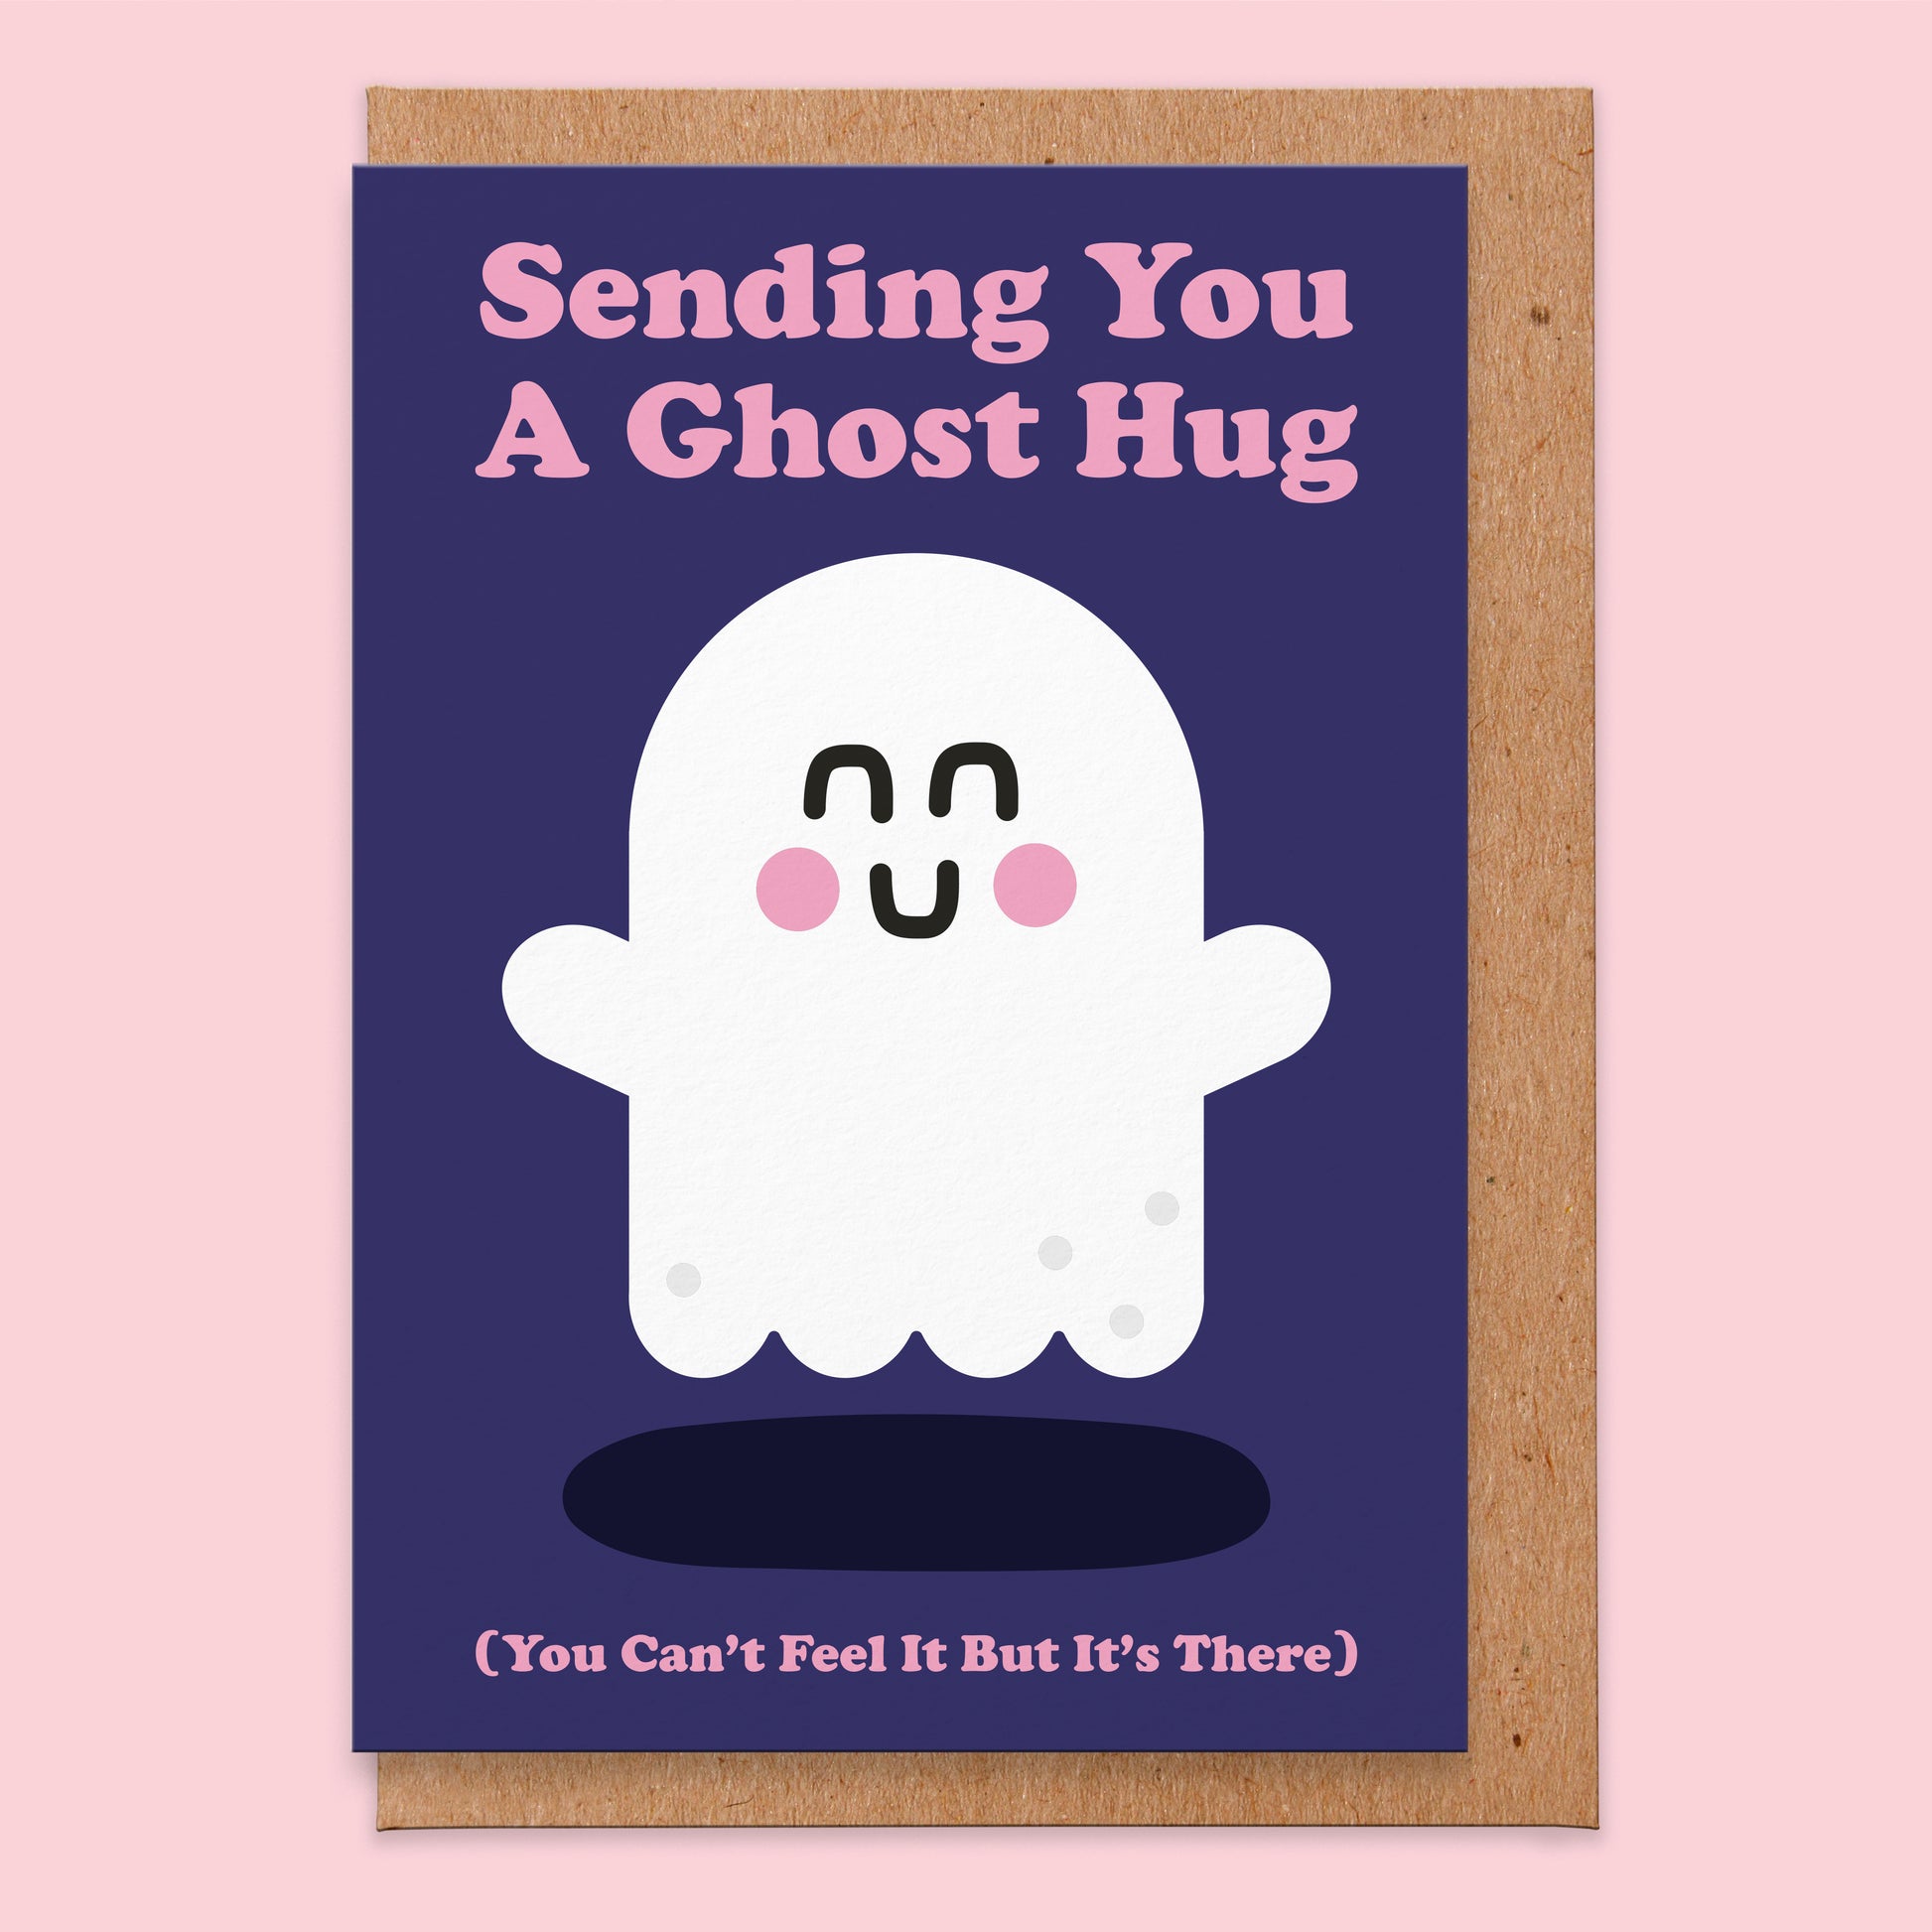 Greetings card with a navy background and an illustration of a ghost on that reads Sending You A Post Hug You Can't Feel It But It's There